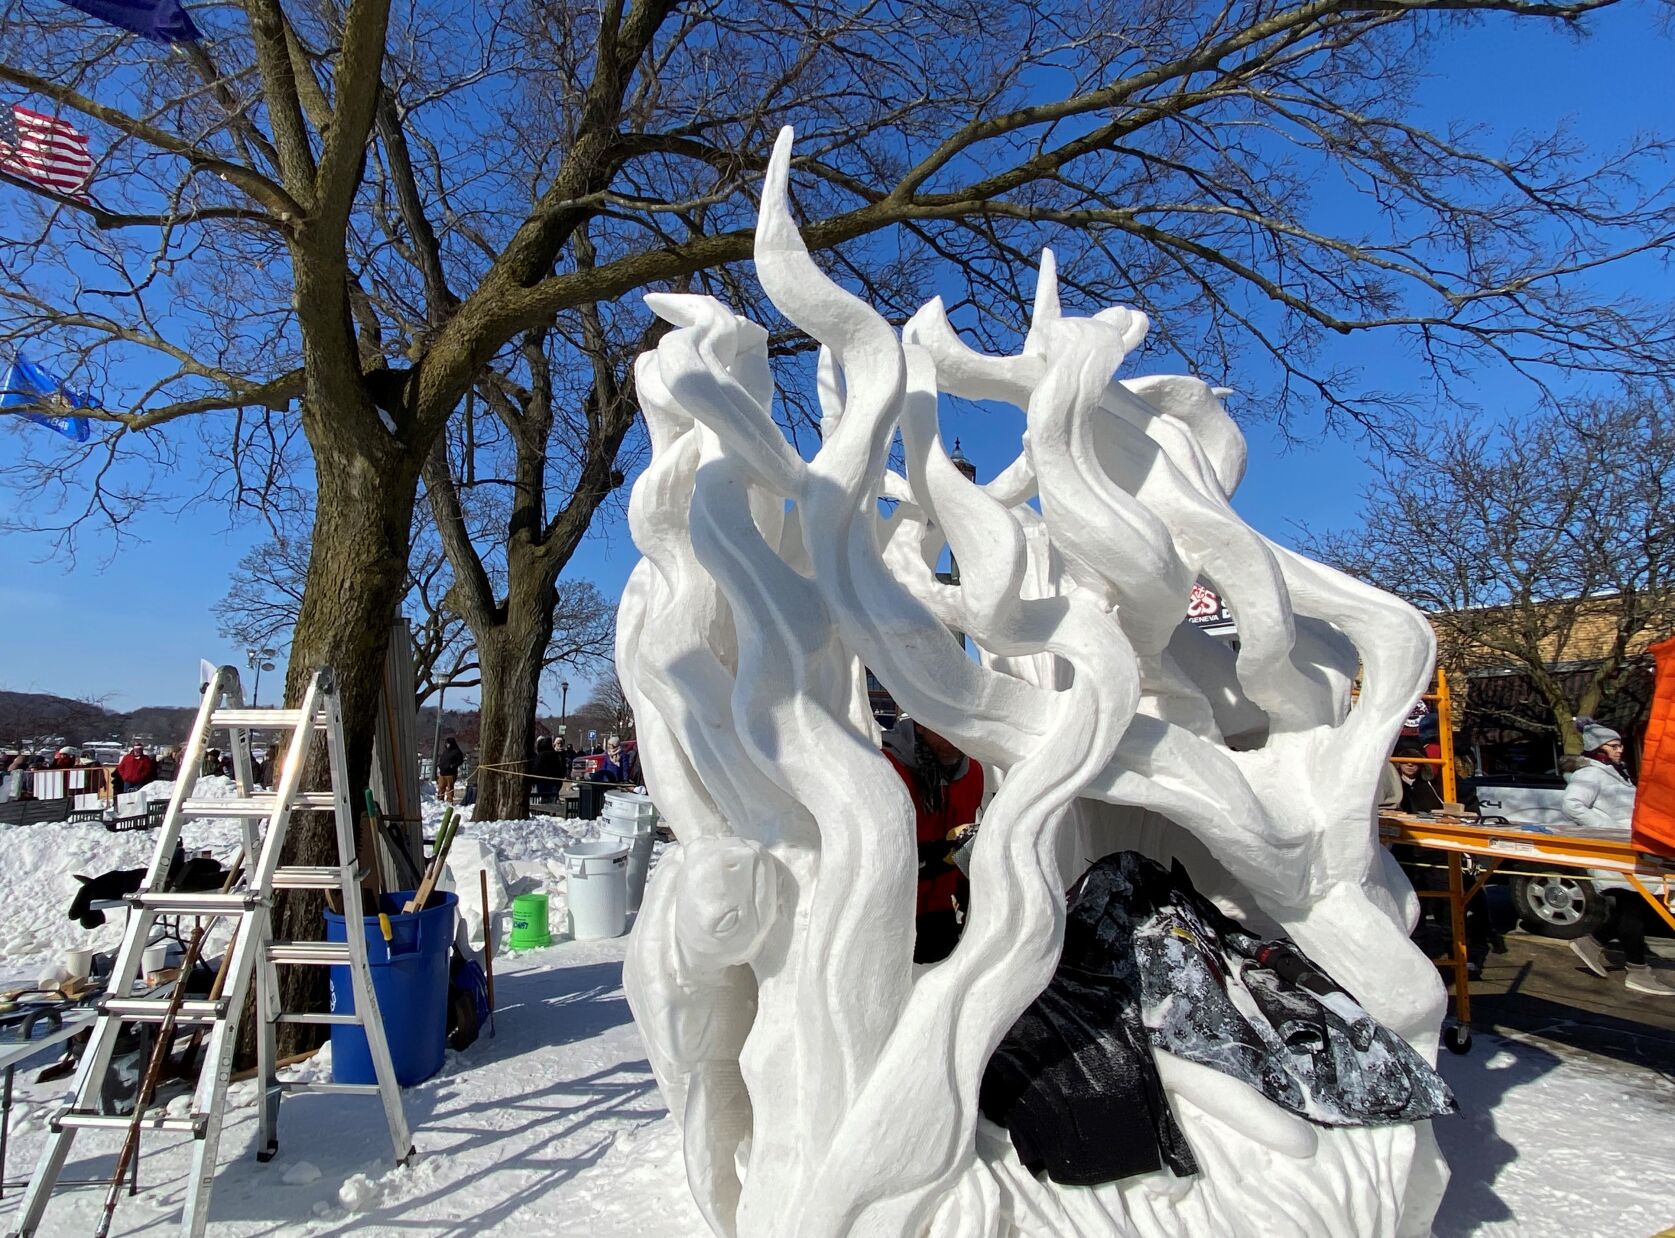 VISIT Lake Geneva prepares for Winterfest and other events